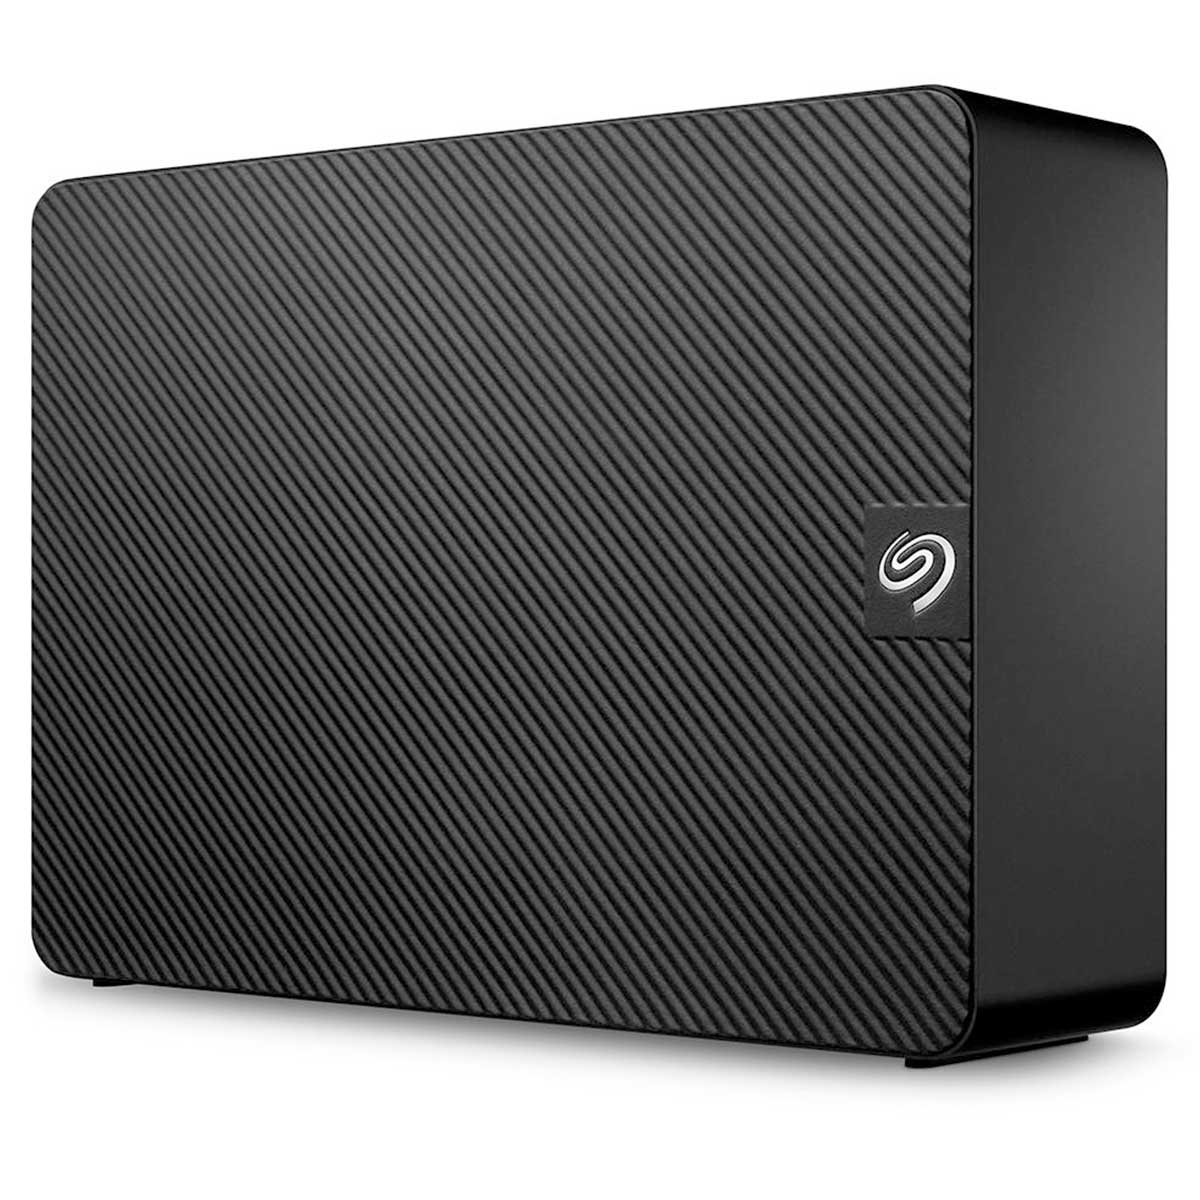 HD Externo 14TB Seagate Expansion - USB 3.0 - STKP14000400